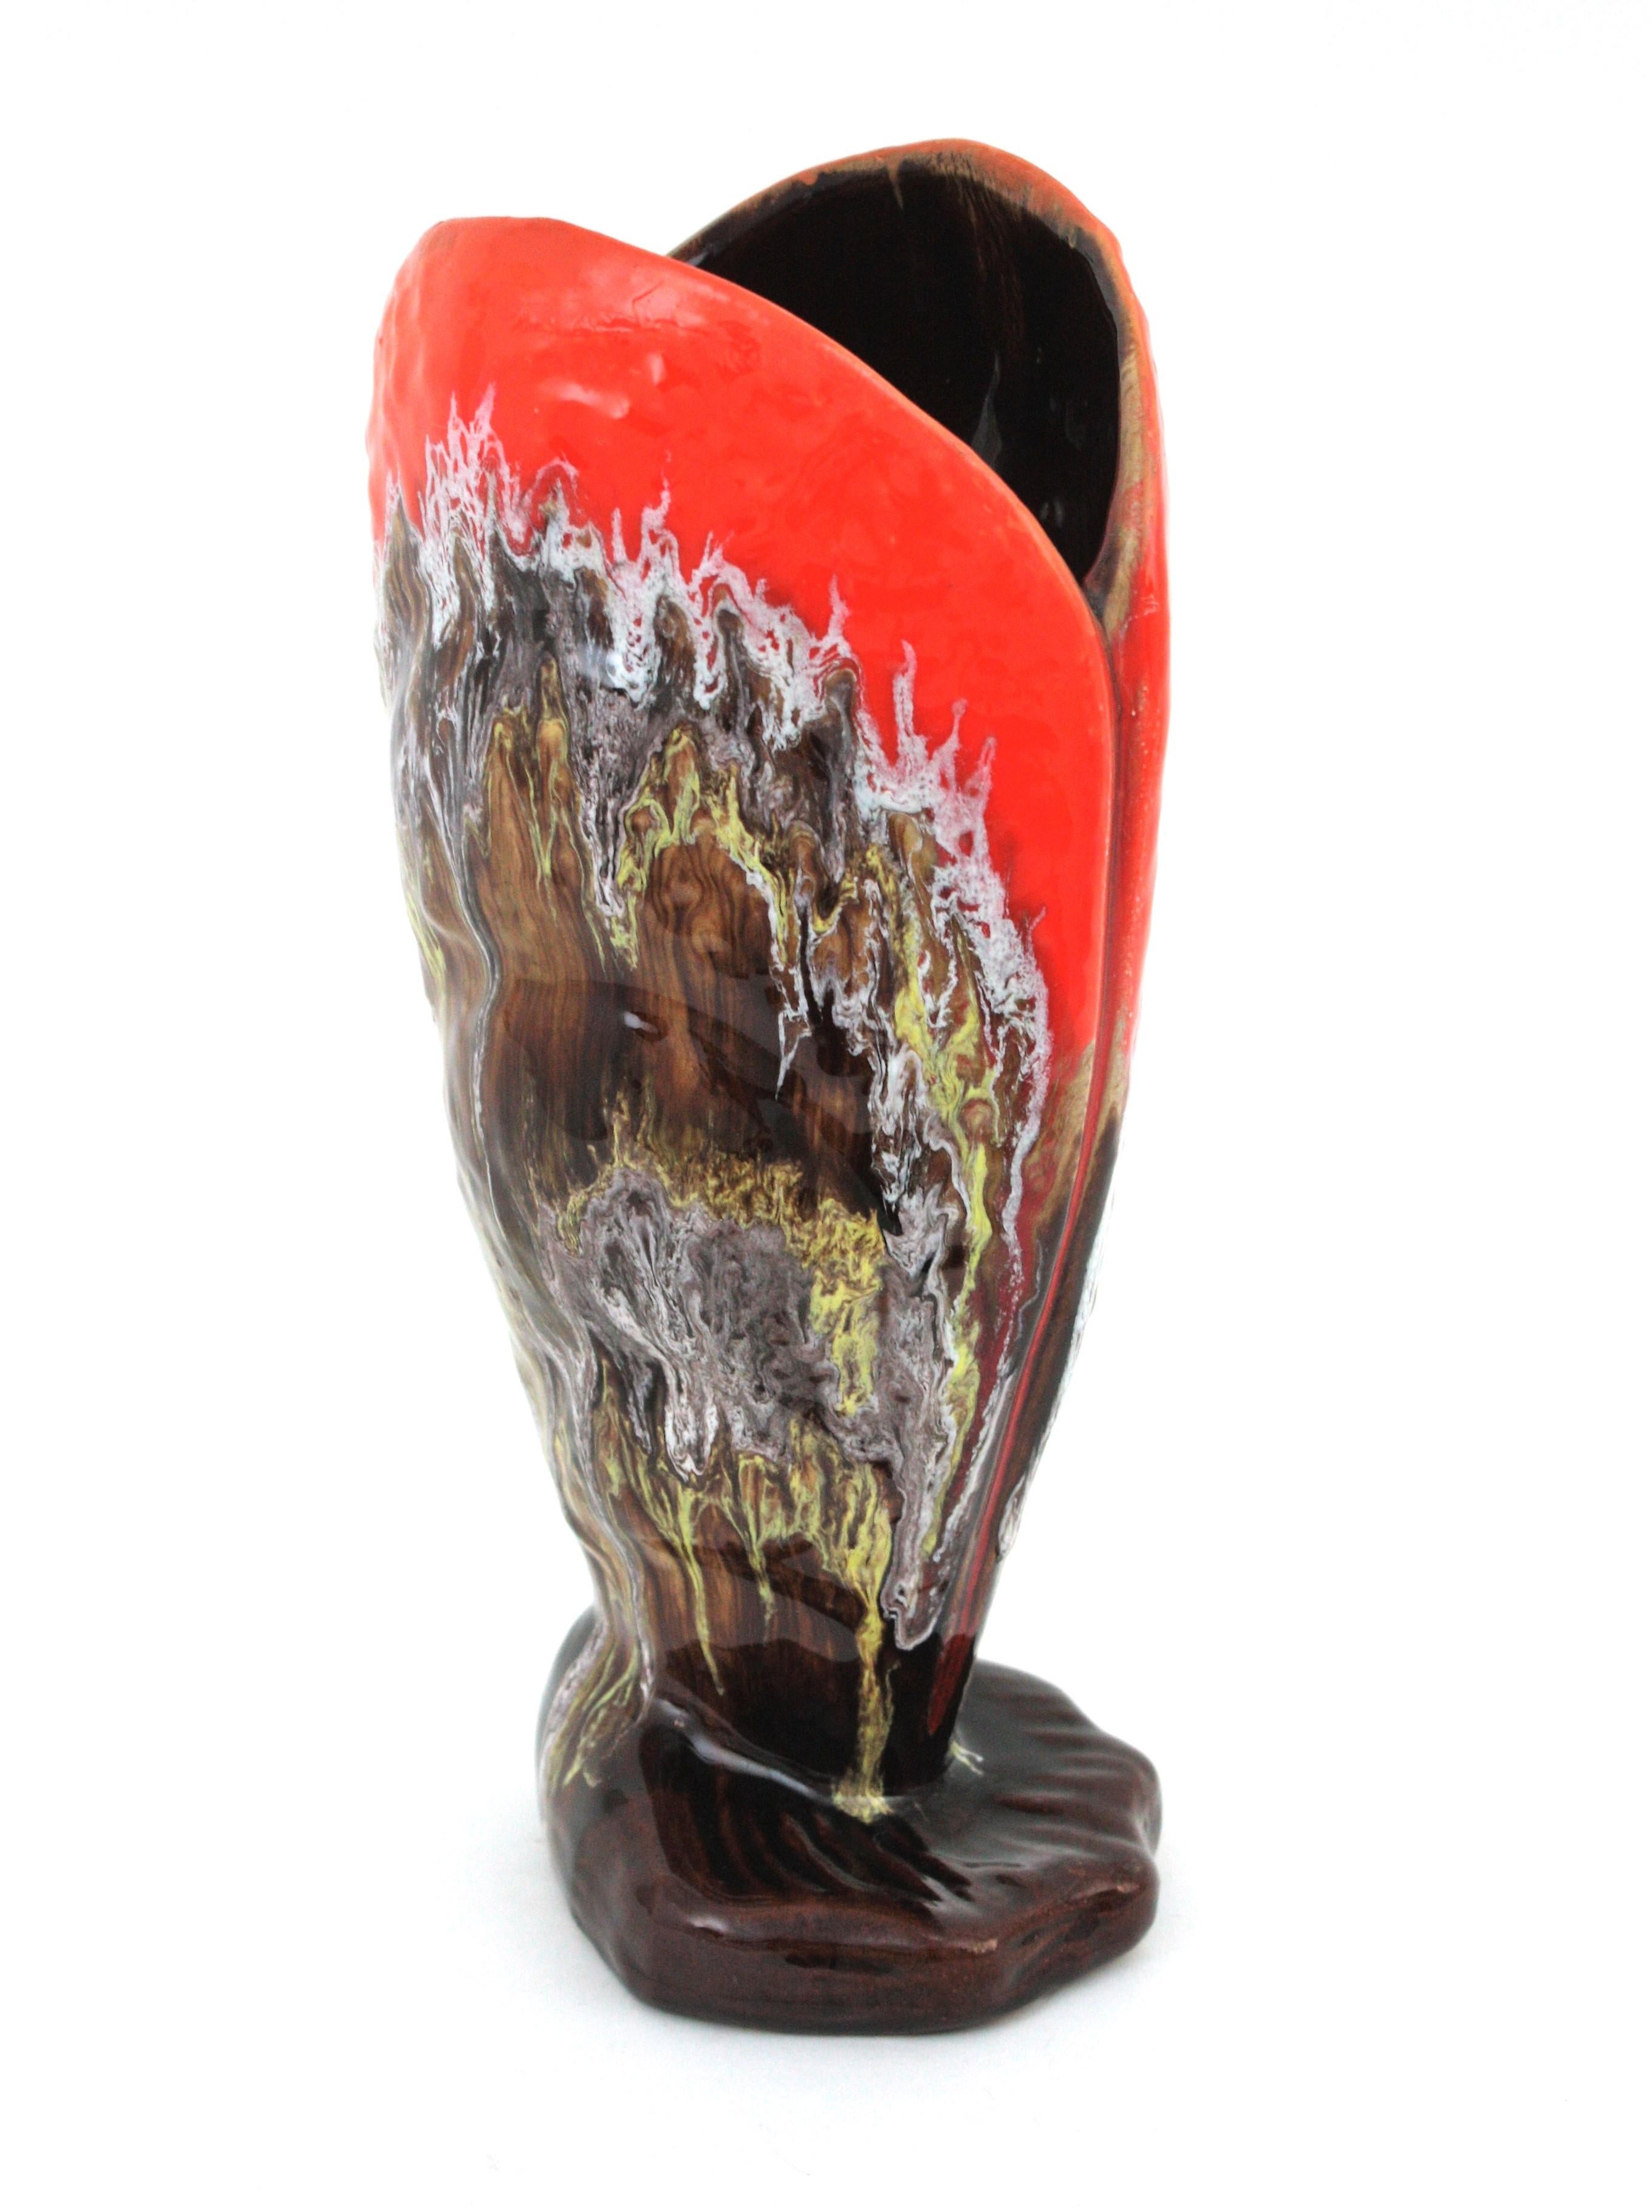 French Large Vallauris Majolica Shell Shaped Vase, Orange and Brown Glazed Ceramic For Sale